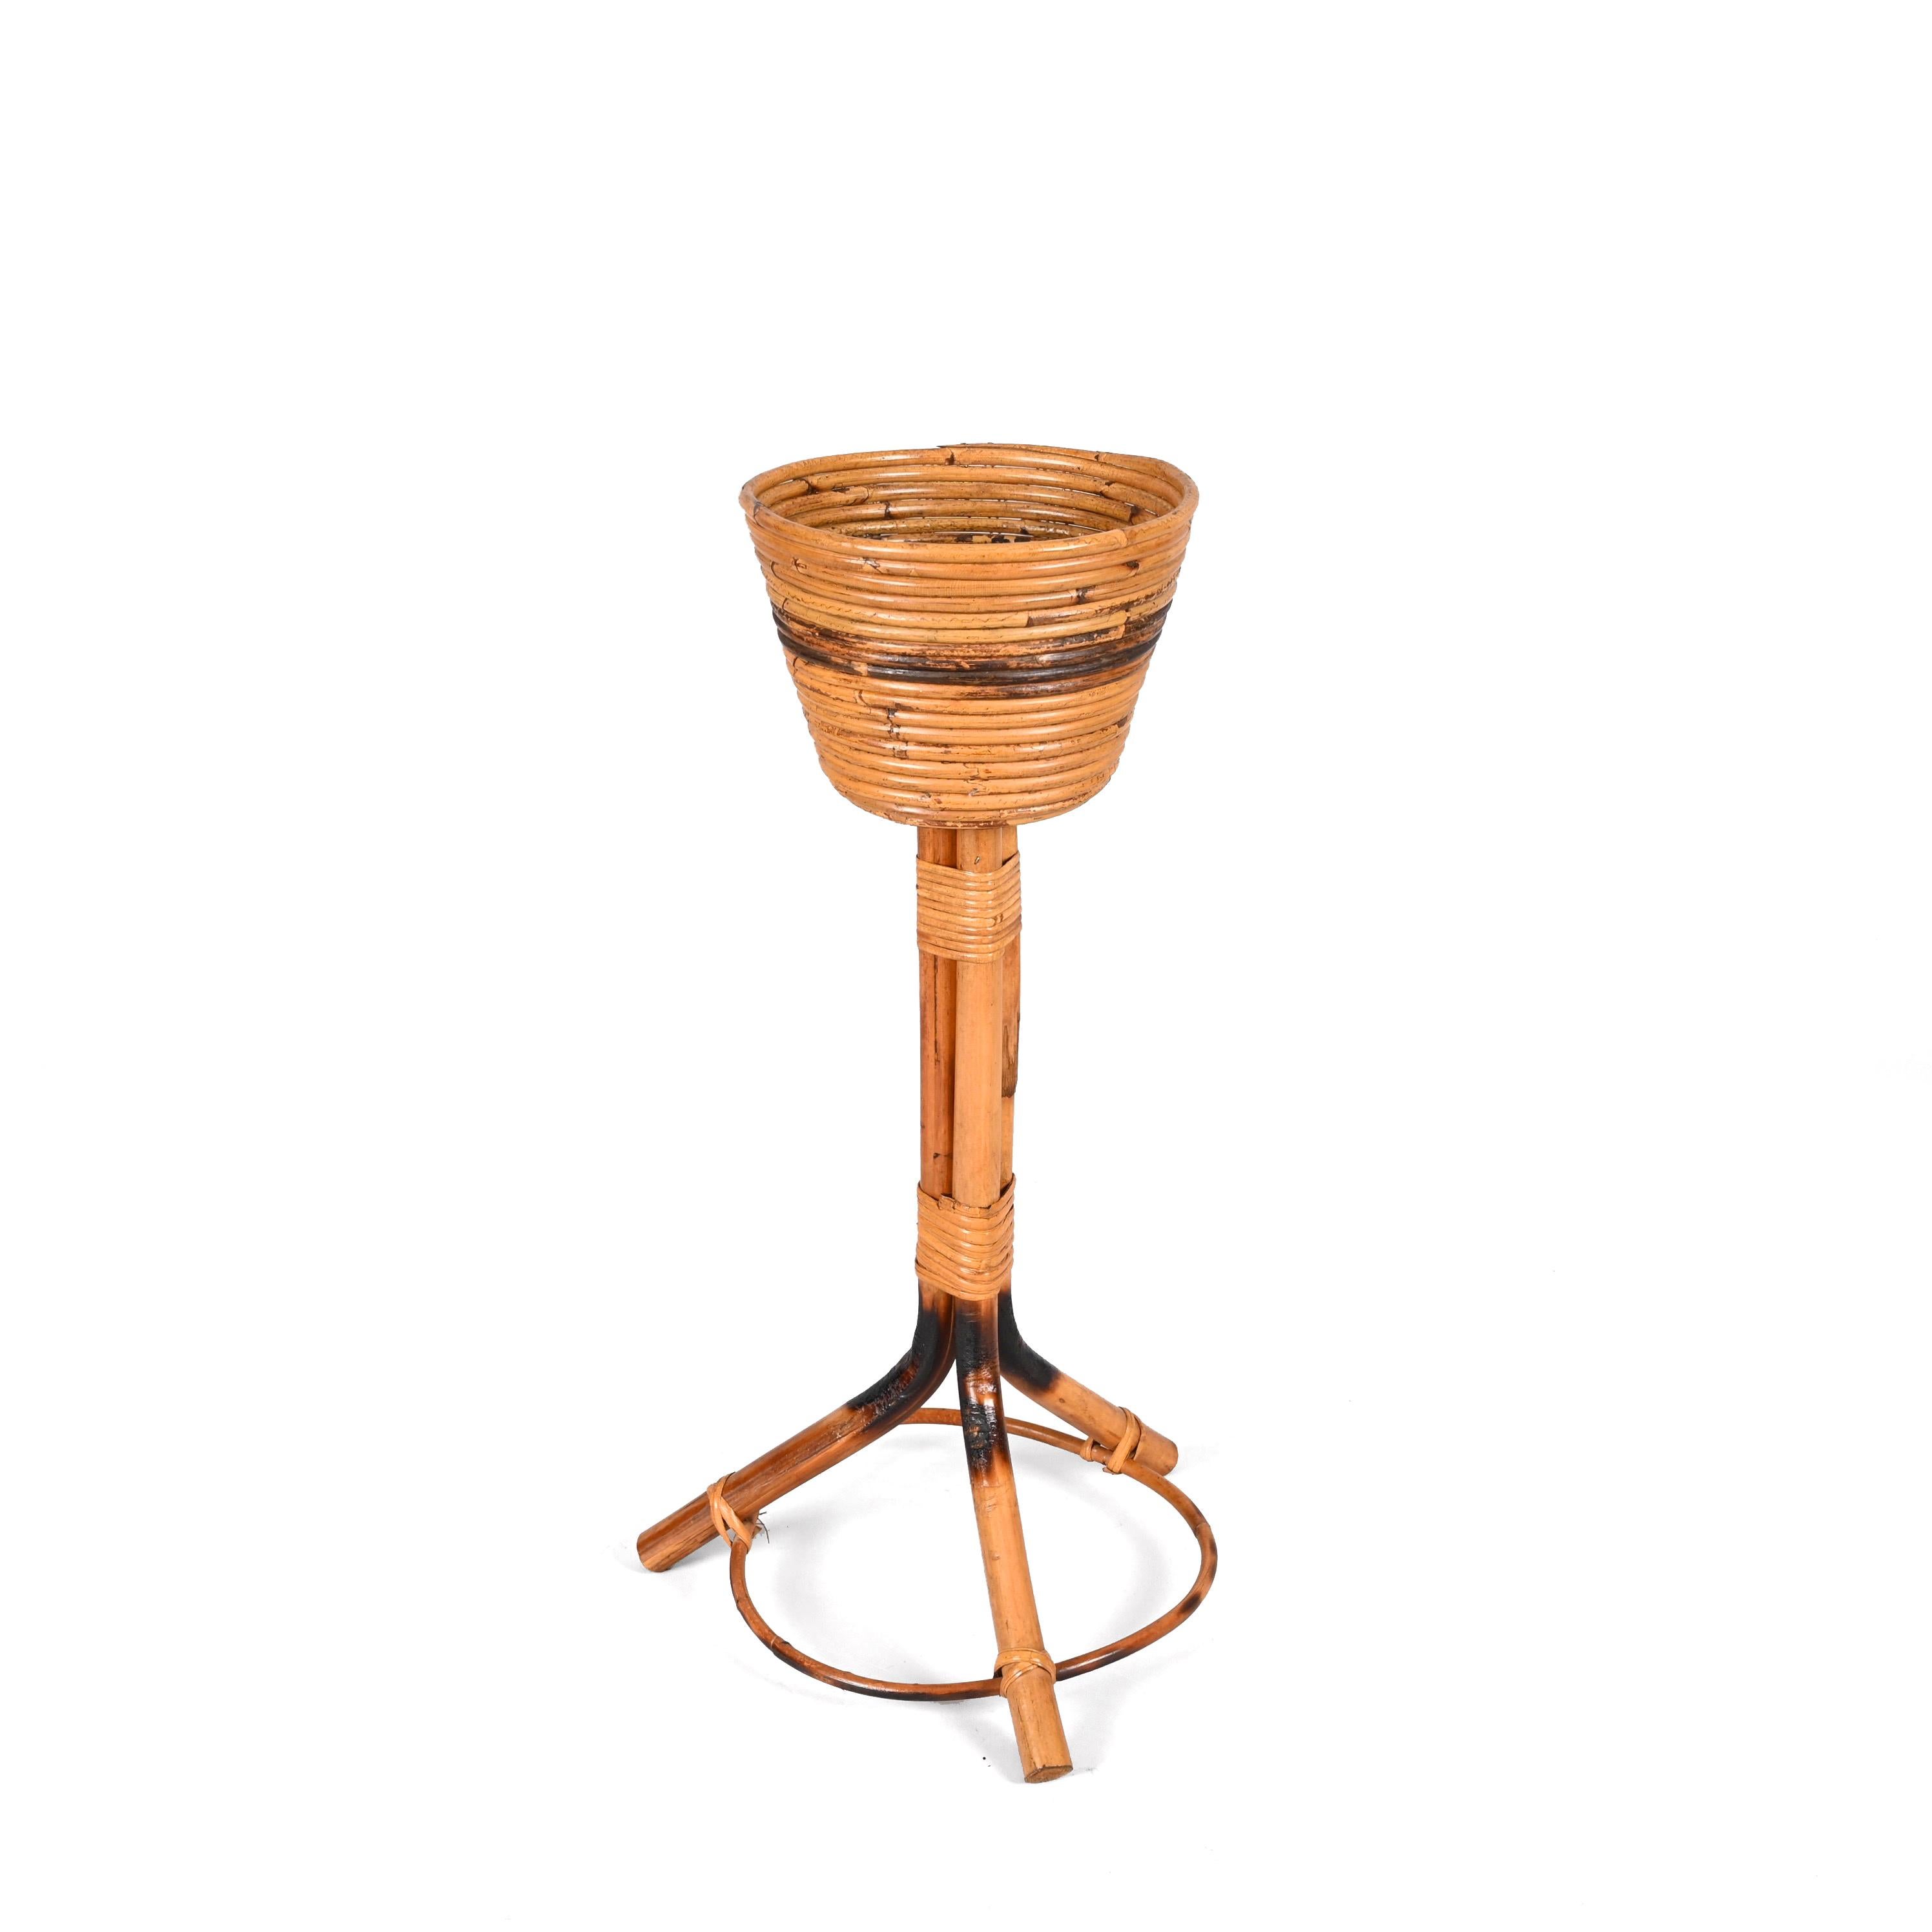 Midcentury Italian Bamboo Cane and Rattan Round Plant Holder, 1950s For Sale 8